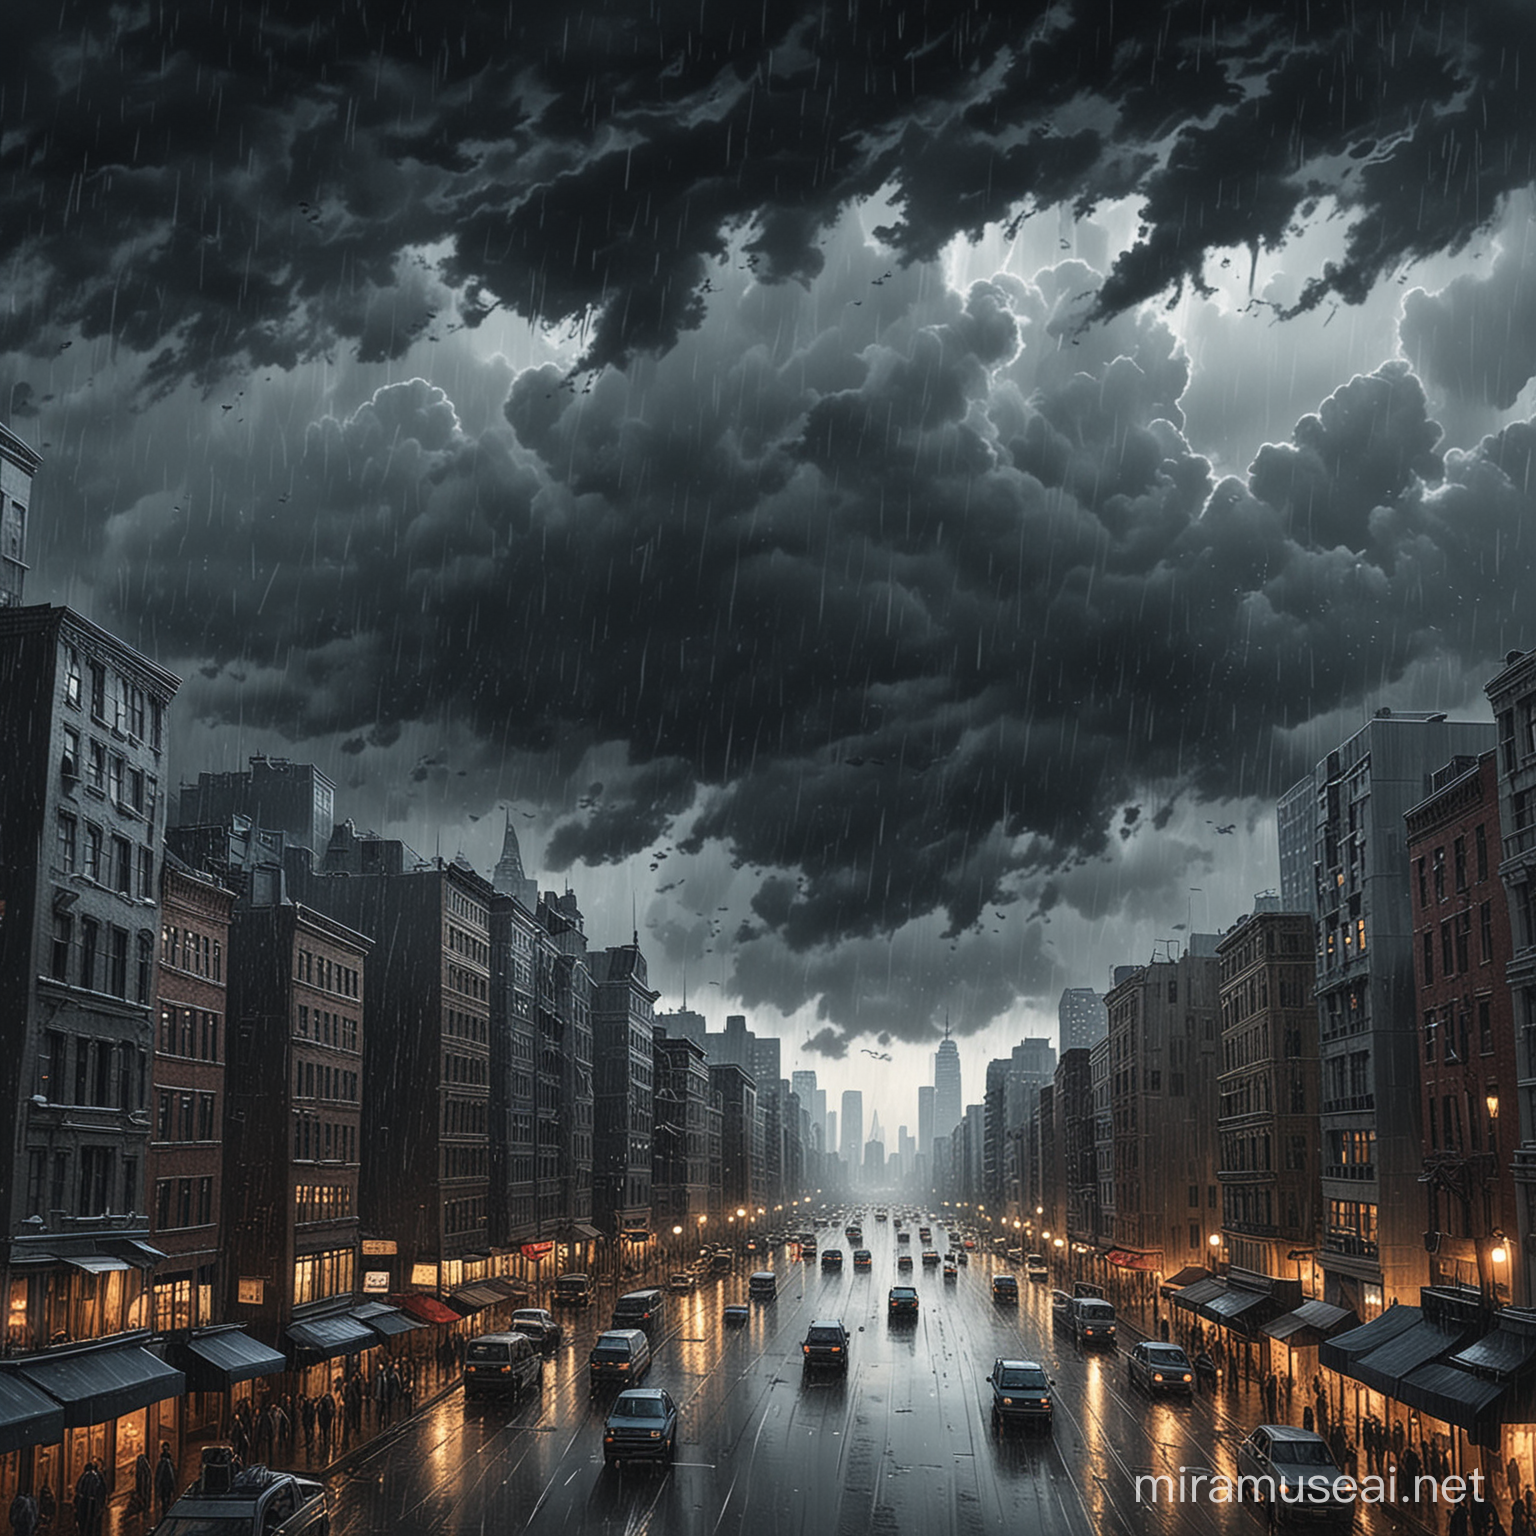 draw a cartoon scene of a sky with dark clouds and heavy rain looming over a crowded city with tall buildings